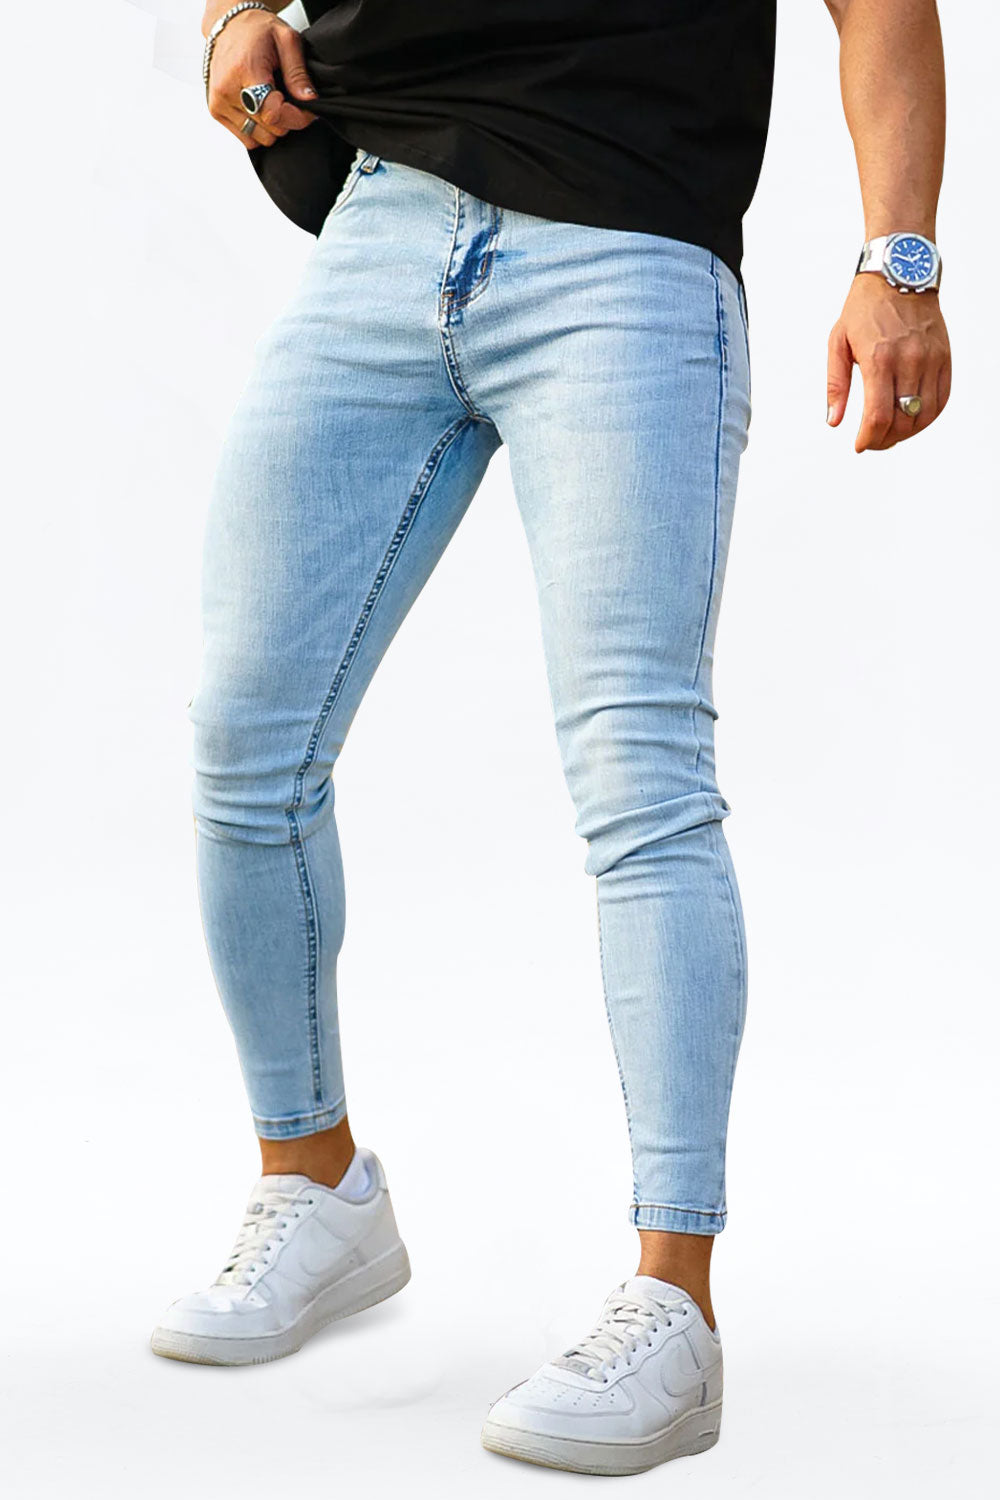 stylish jeans for men